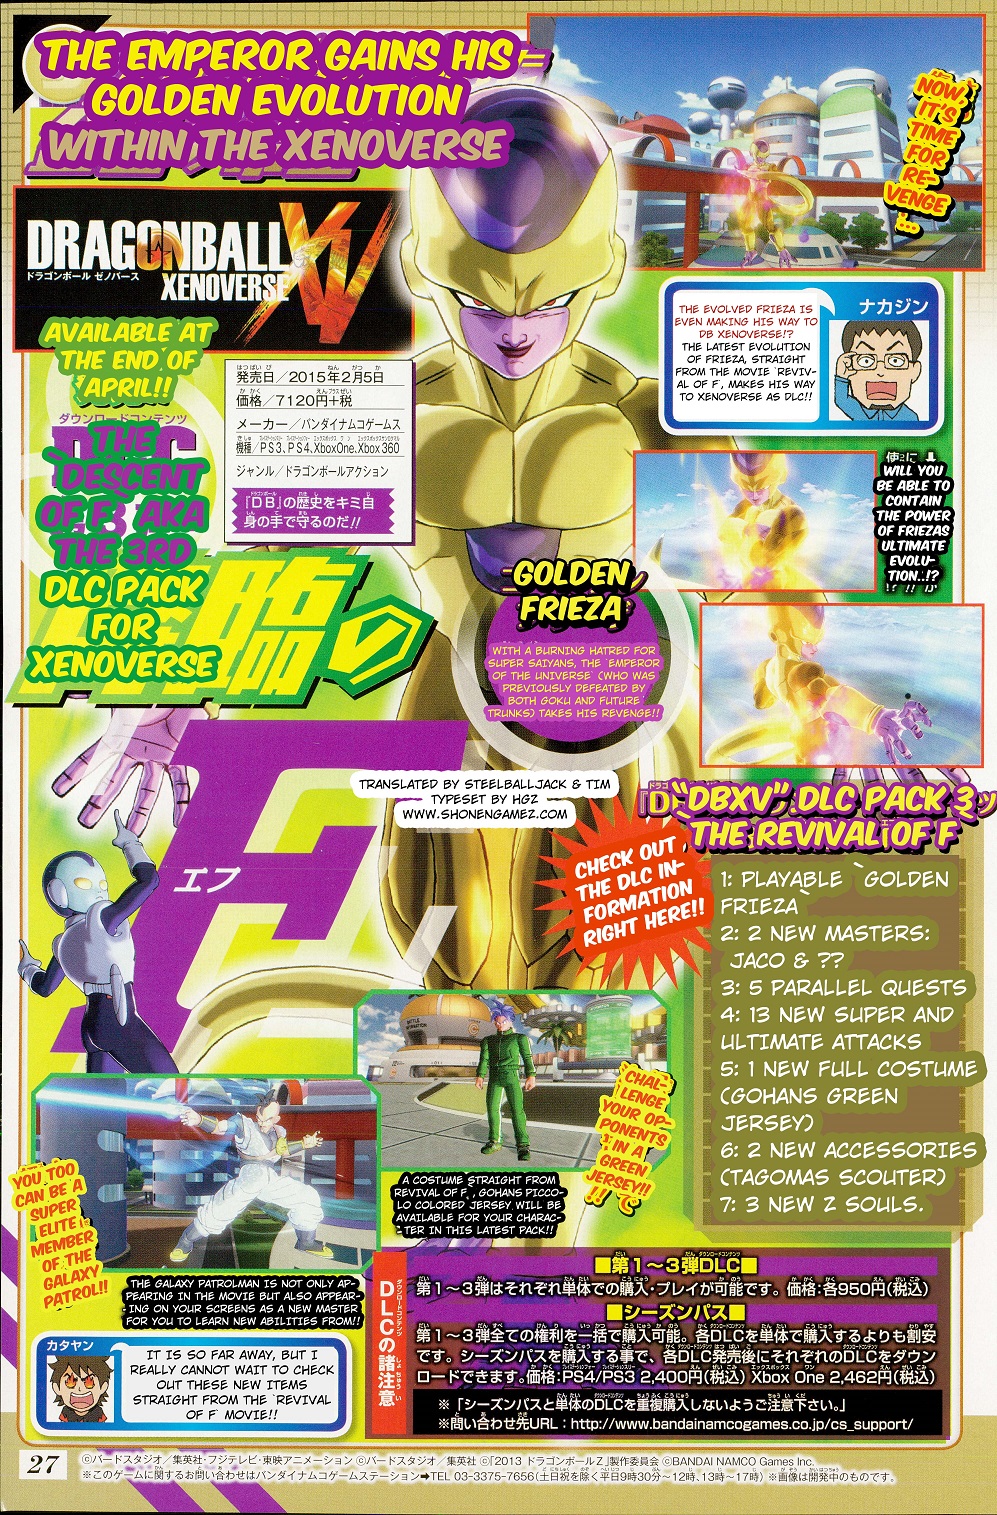 Dragon Ball Xenoverse DLC Pack 3 Revealed - Capsule Computers